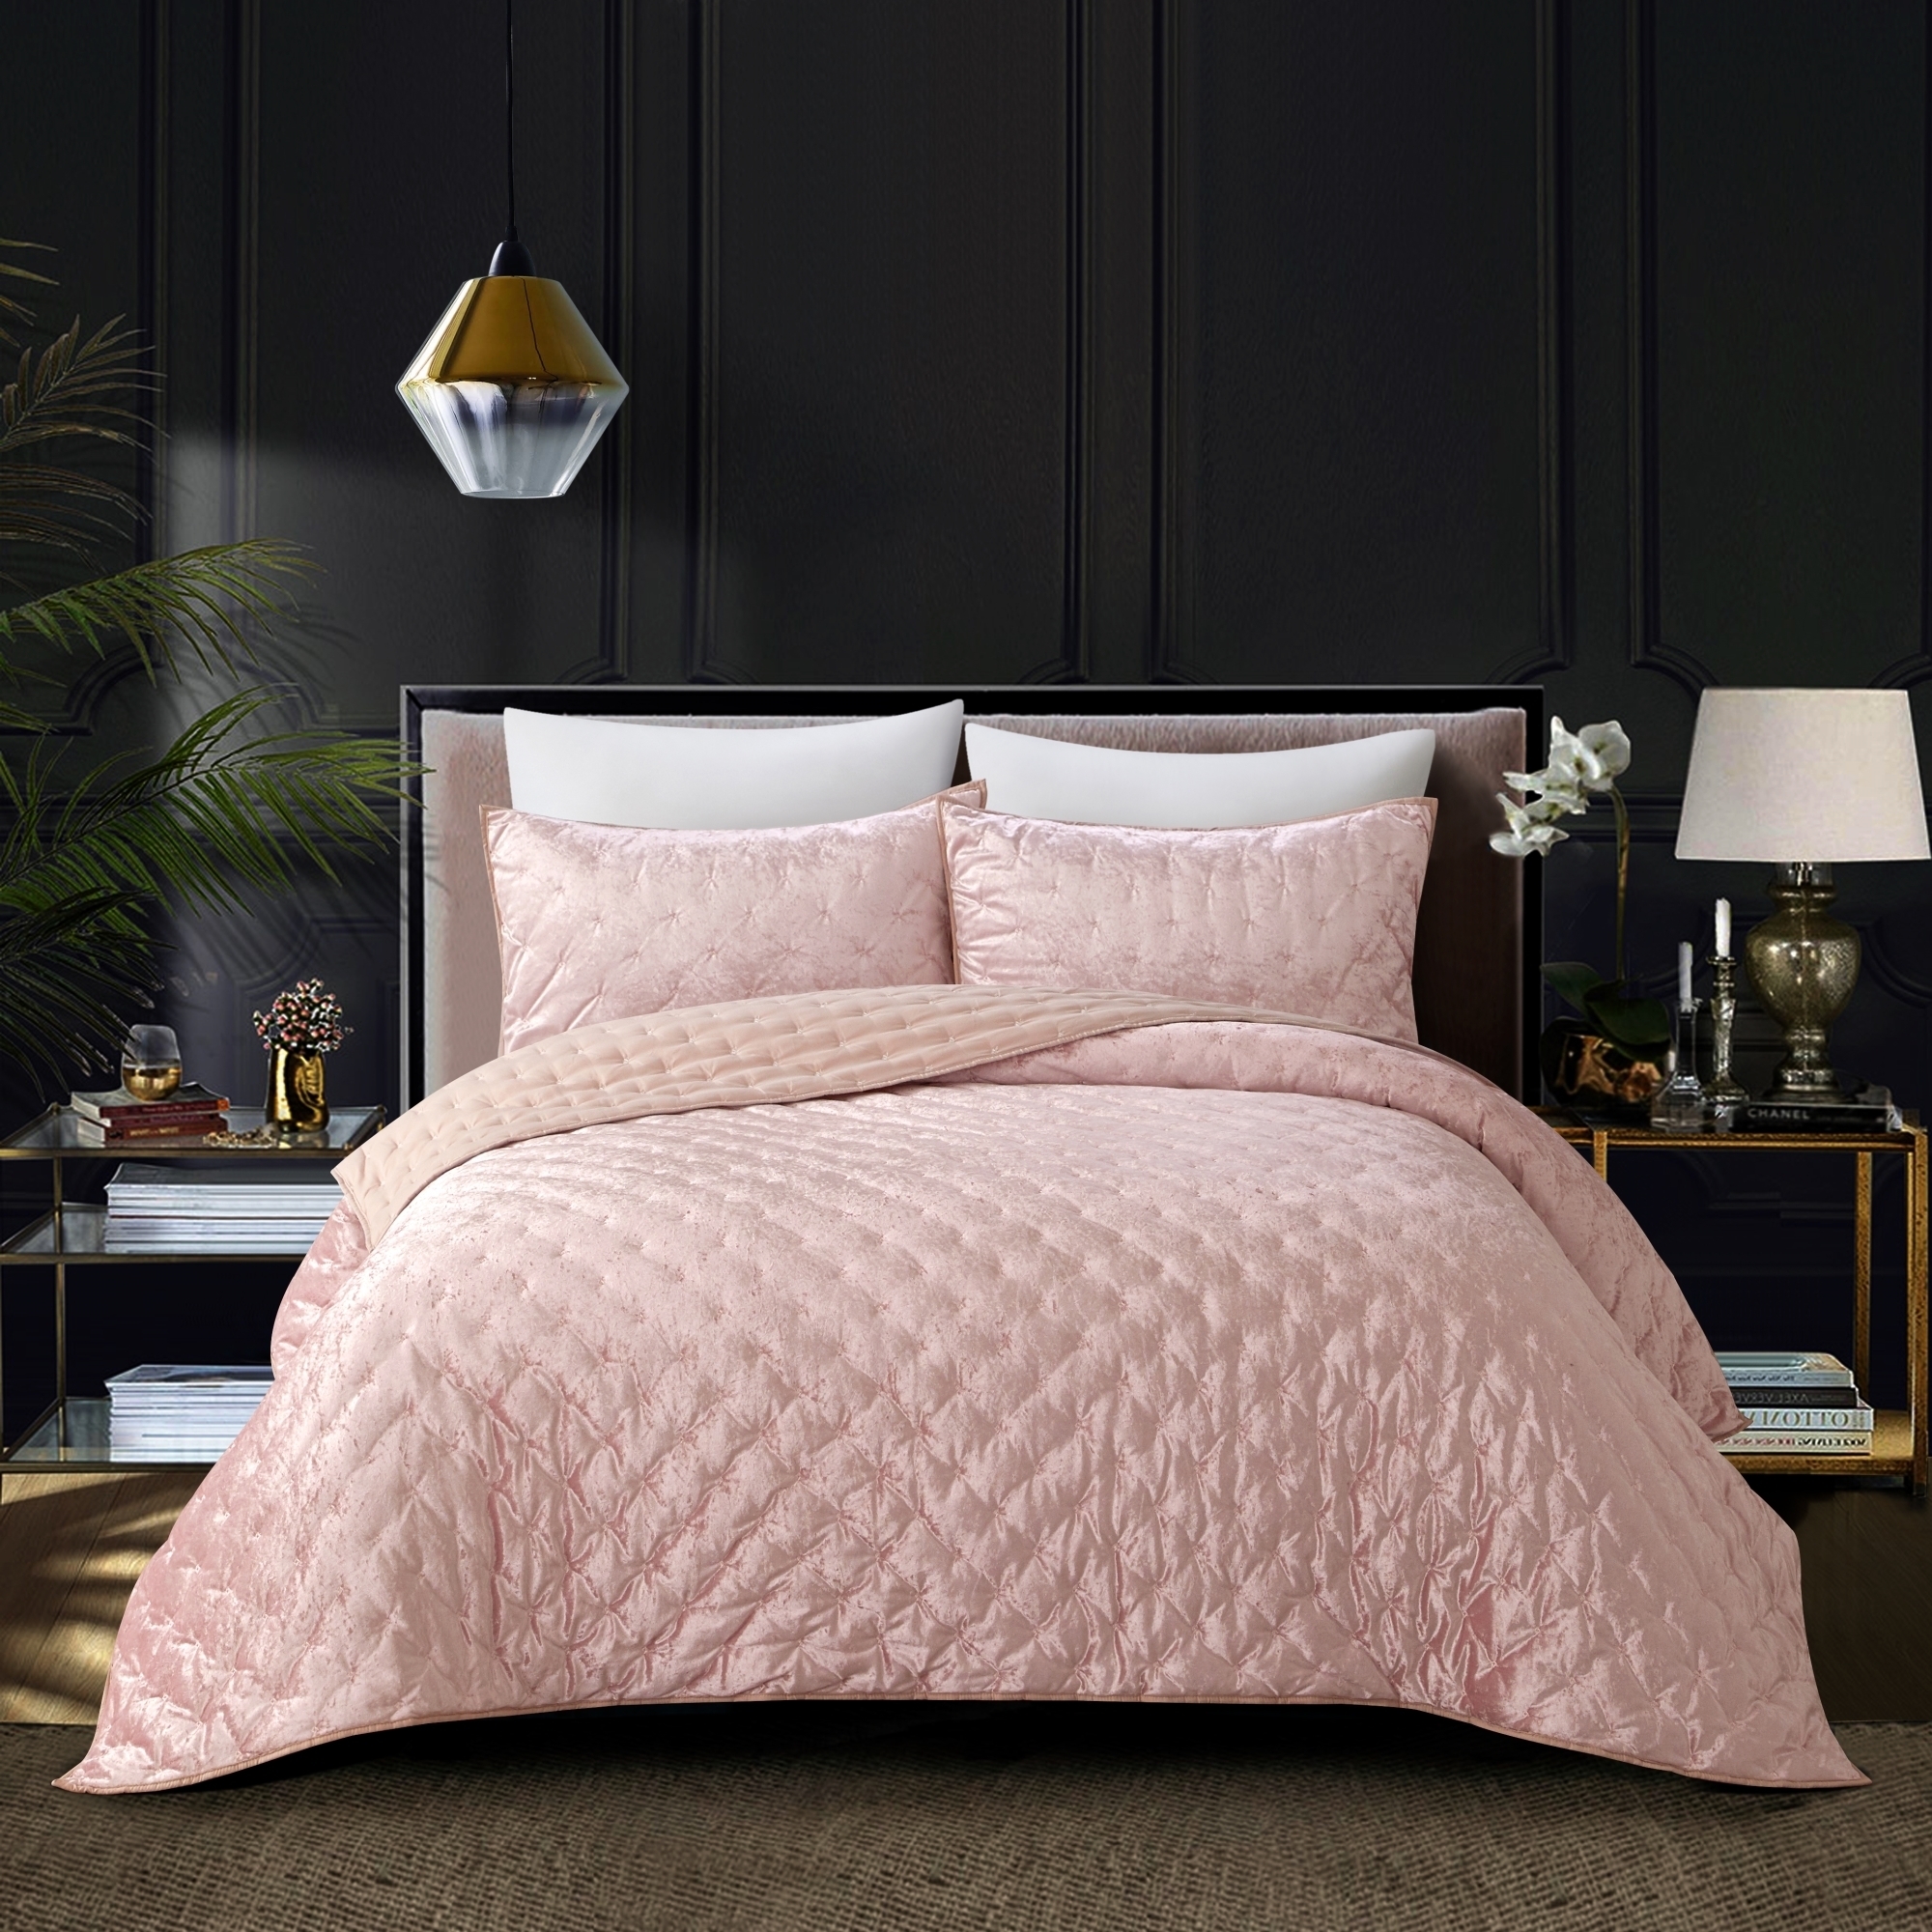 Meagan Comforter Set -Crushed Velvet , Soft And Shiny - Blush, Twin/twin Xl